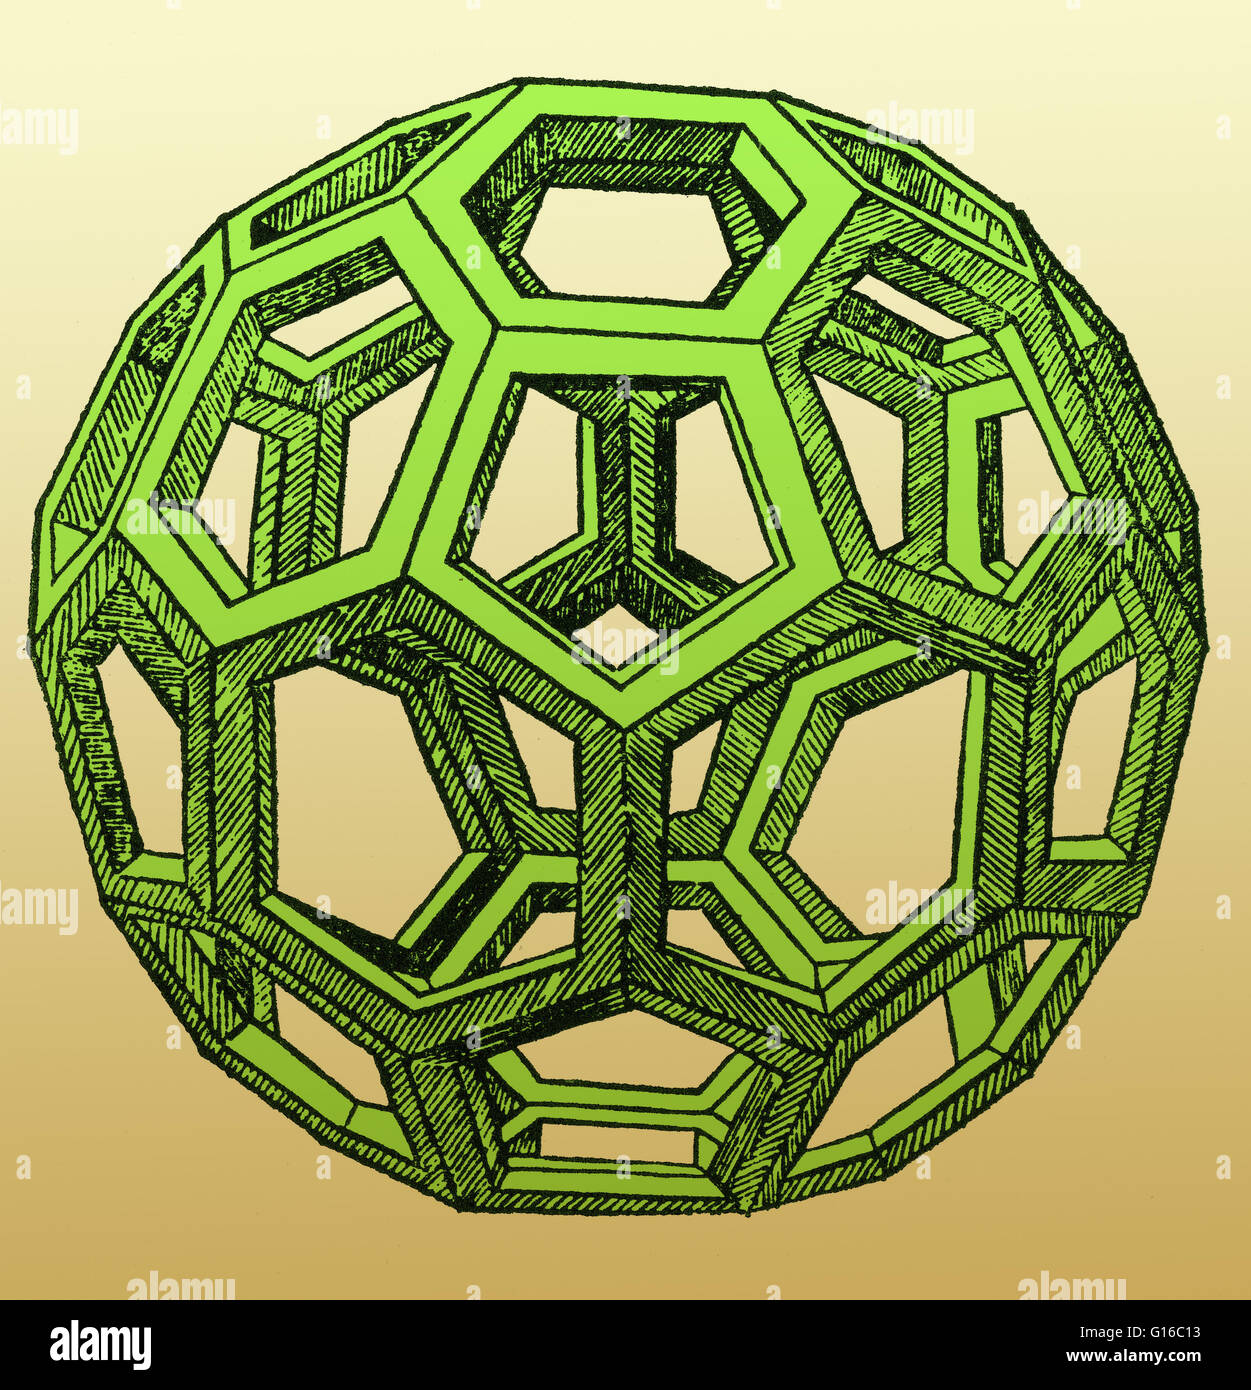 Figure Derived from Icosahedron. De Divina Proportione (About the divine proportions) is a famous book on mathematics written by Luca Pacioli around 1497 in Milan and first printed in 1509. Today only two versions of the original manuscript are believed s Stock Photo